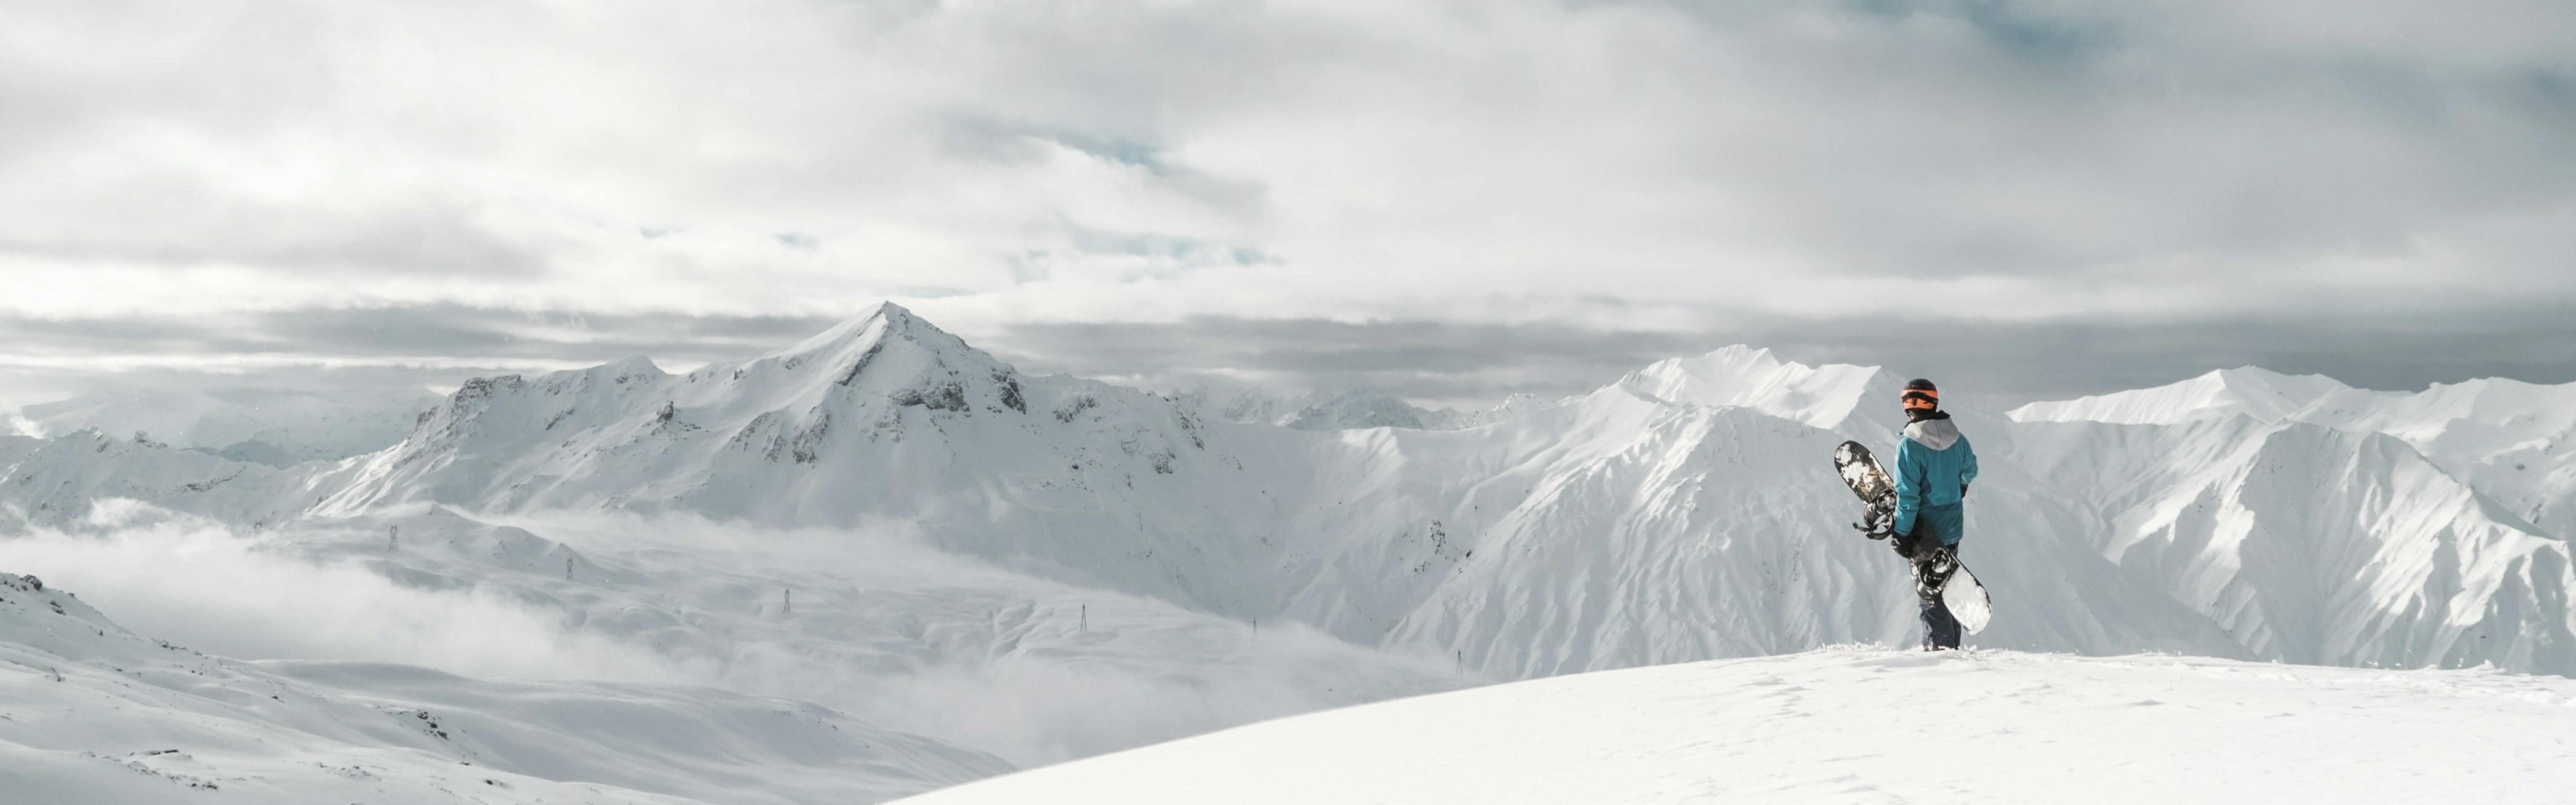 A snowboarder standing at the top of a snowy mountain. 